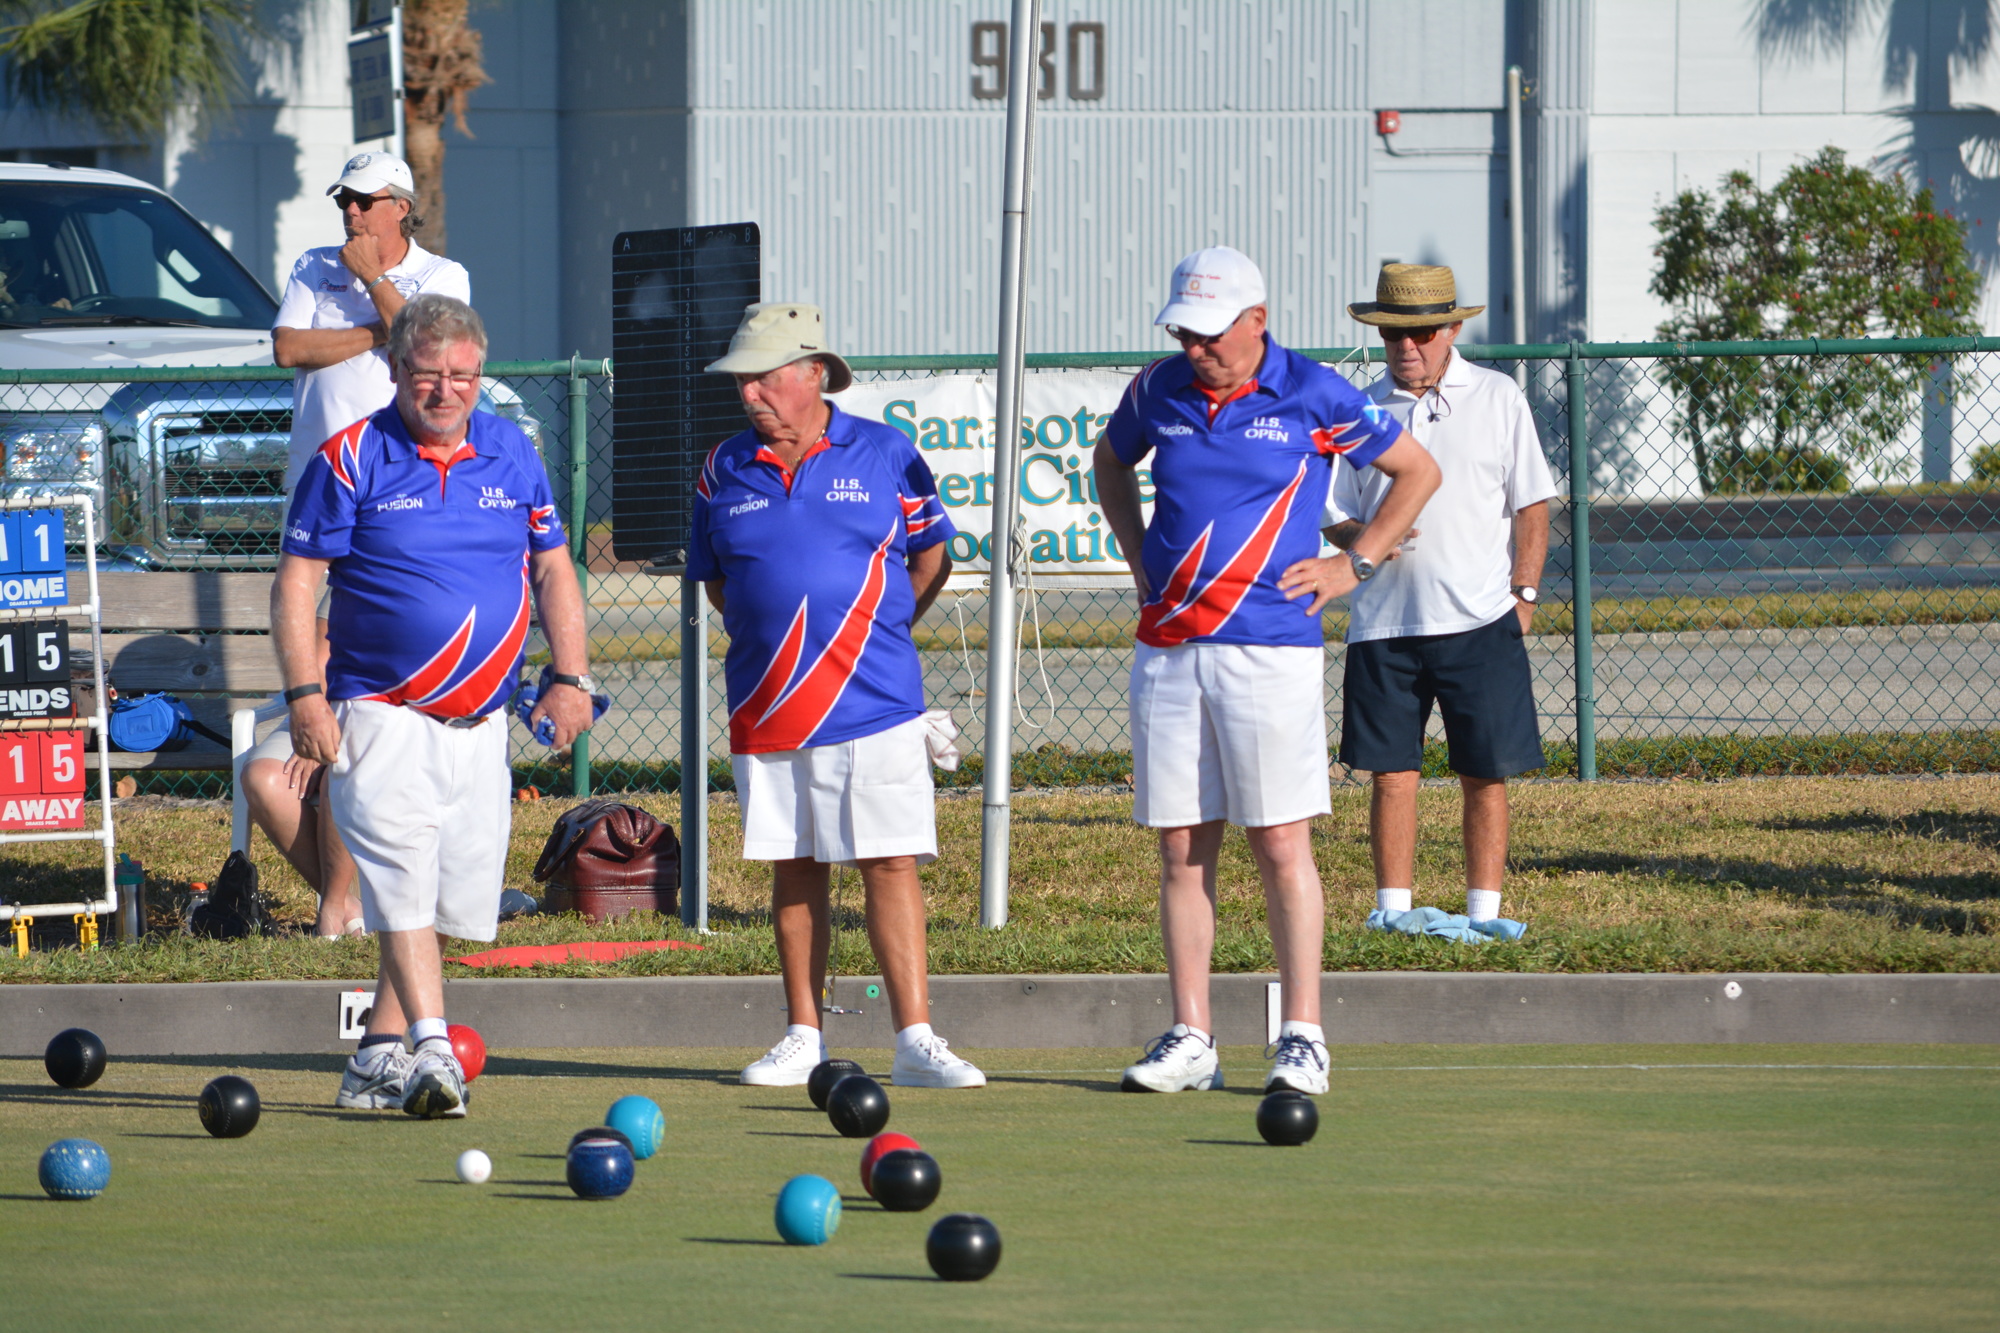 Lawn bowling is a niche sport in America, but there’s a prime piece of real estate dedicated to it in Sarasota.